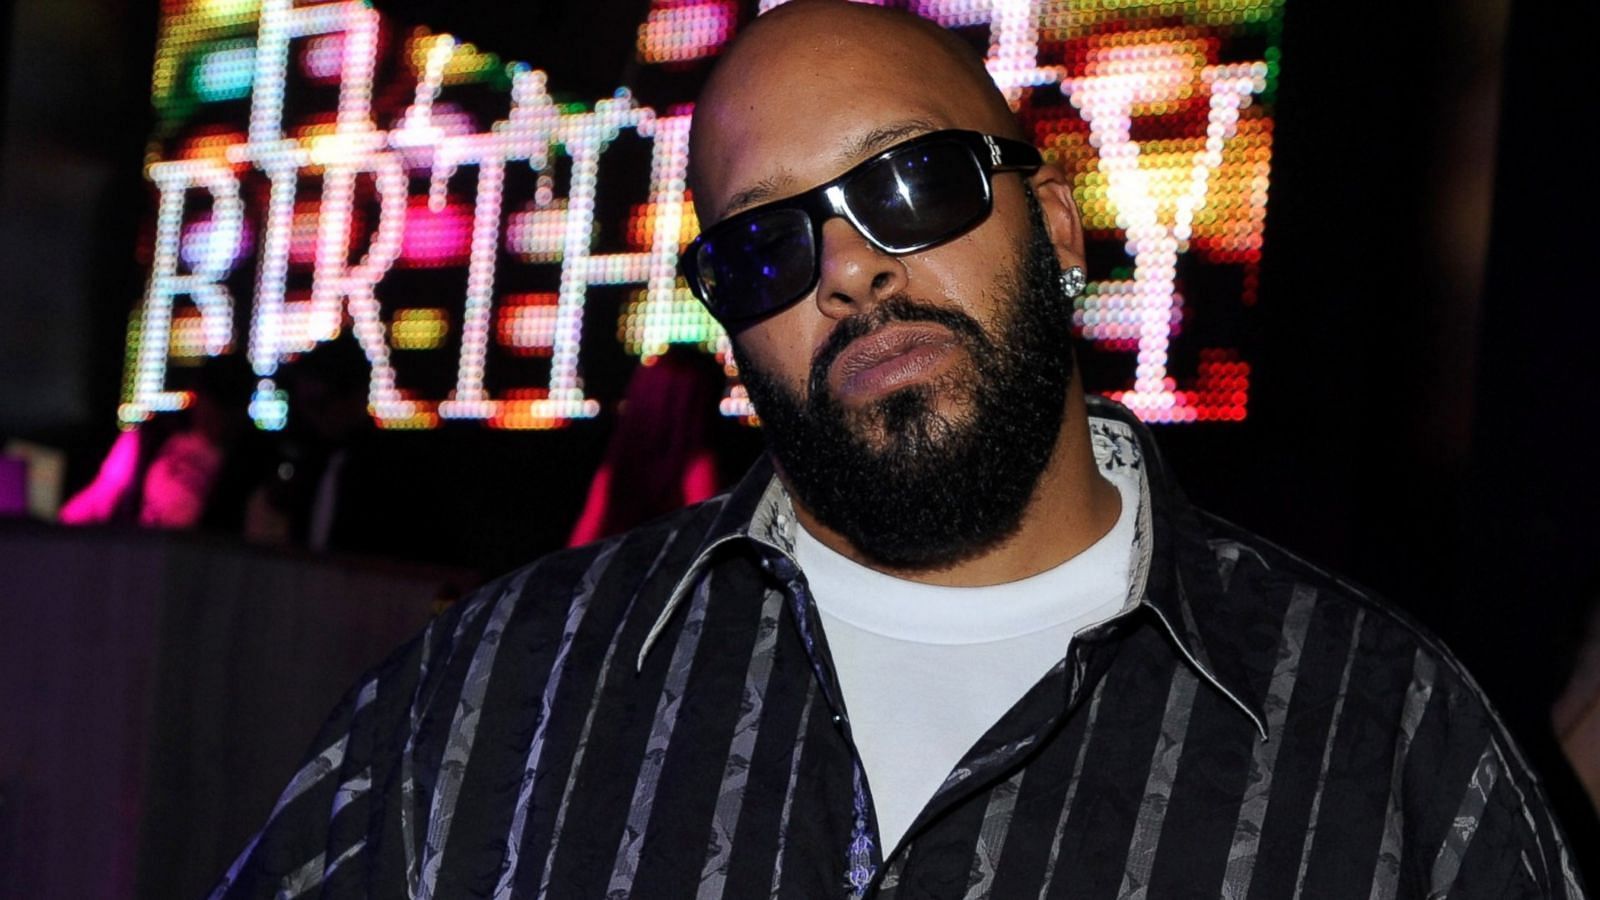 Suge Knight had a career as an NFL player